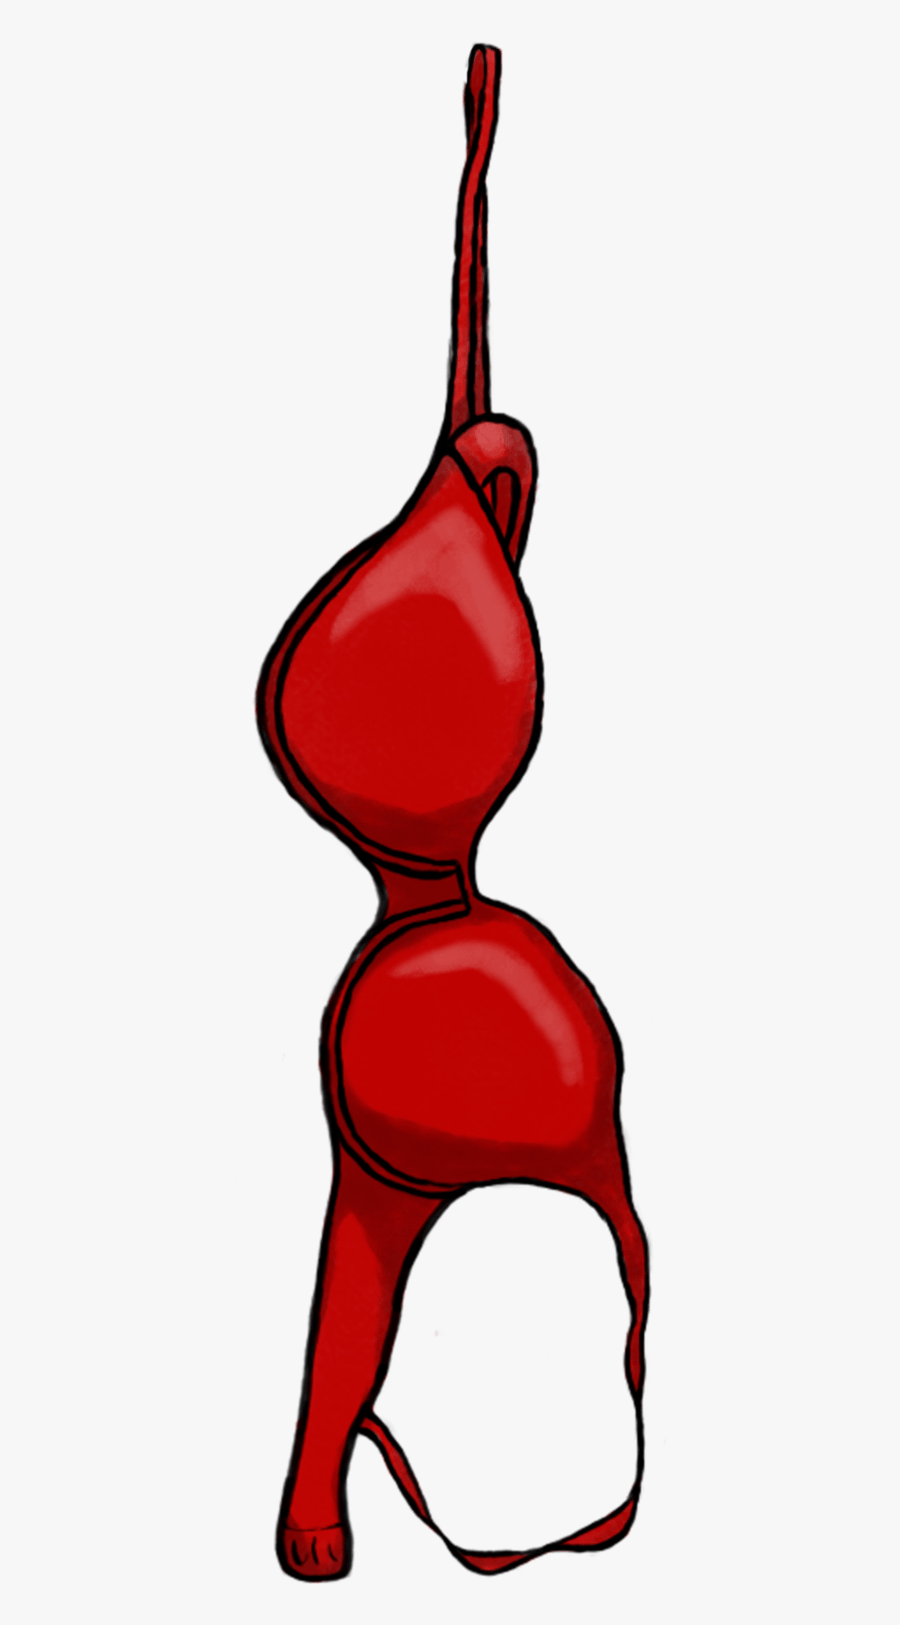 Bra Clipart - Bra Clipart Png , Free Transparent Clipart - ClipartKey.